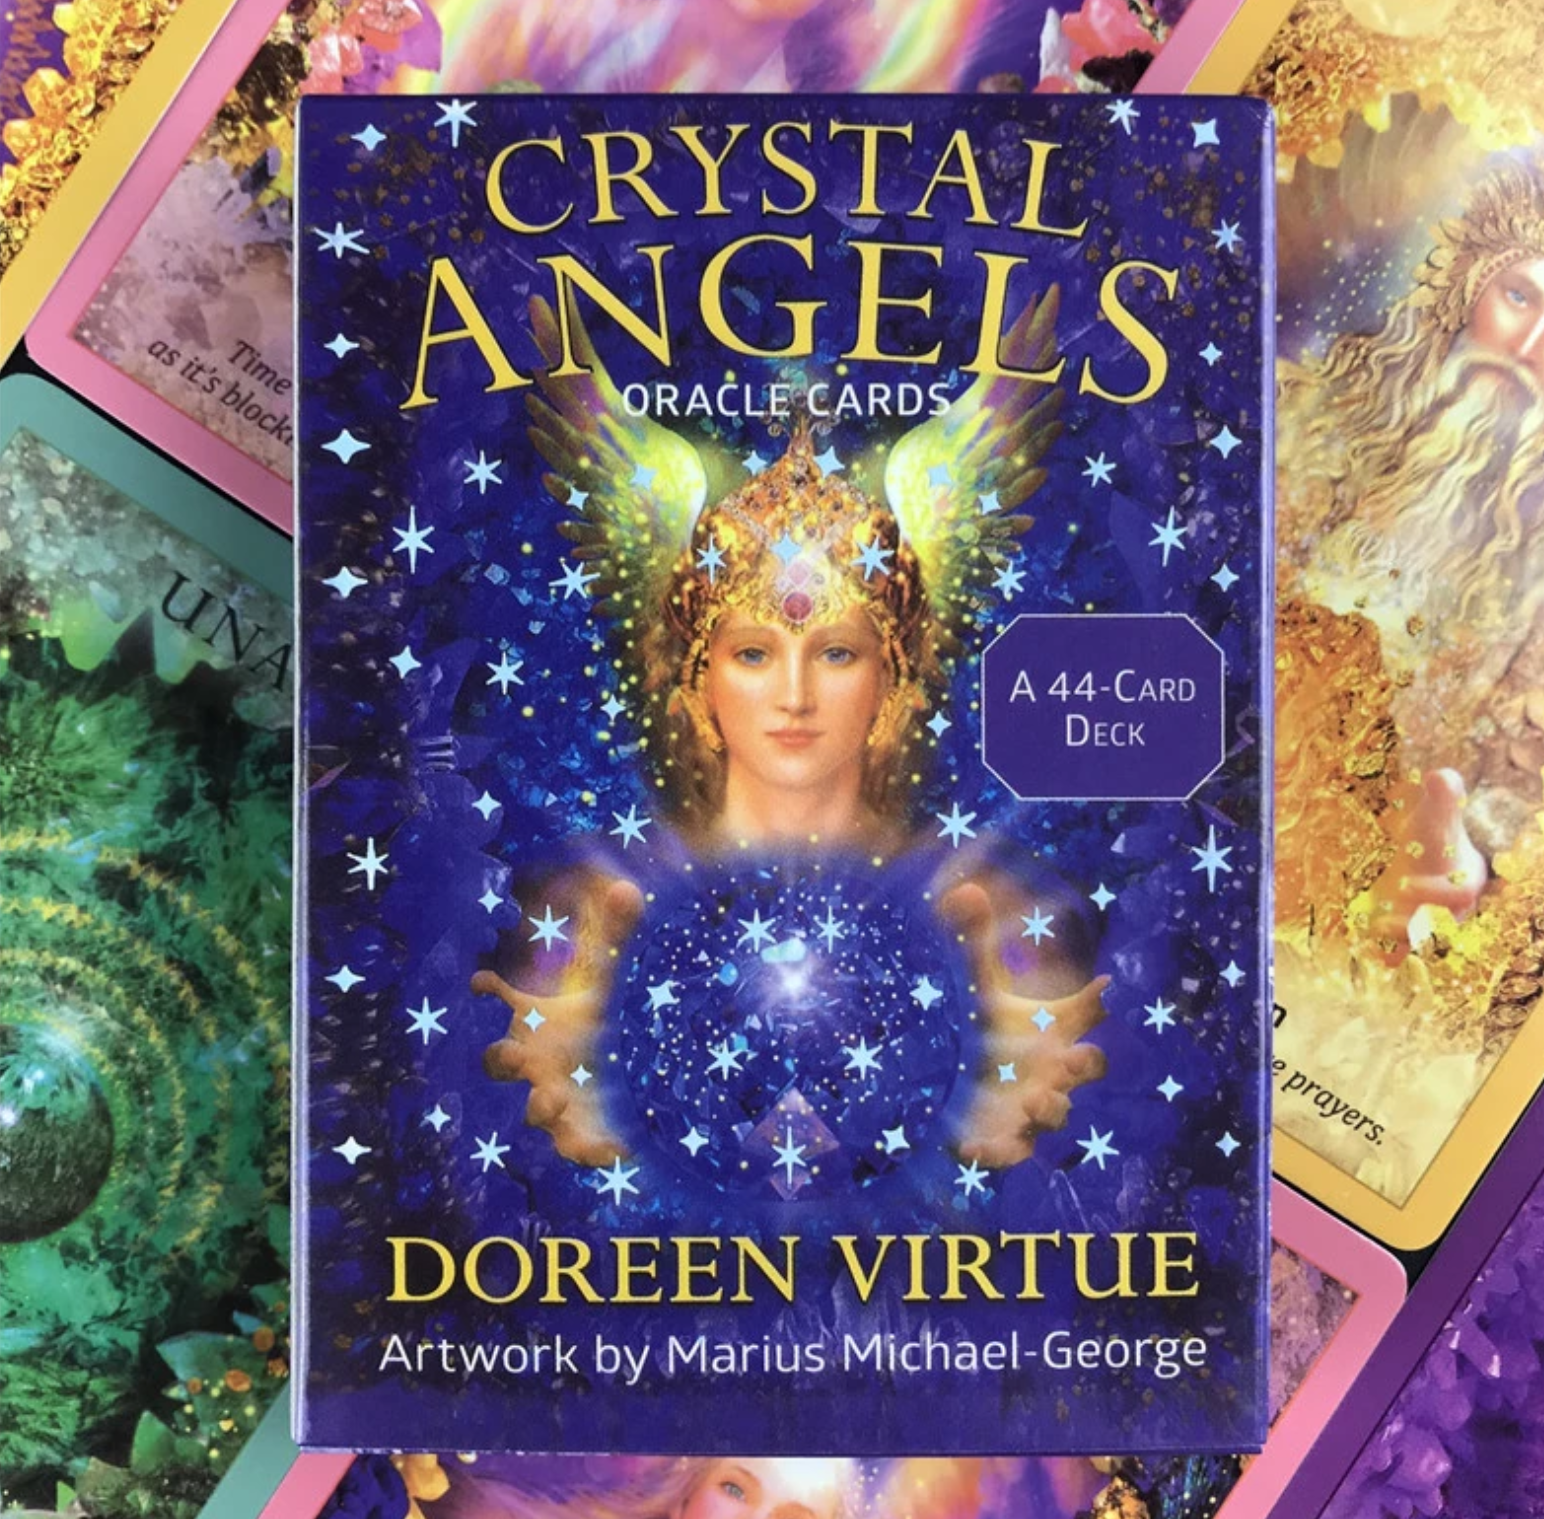 Crystal Angels Oracle Cards Mini Travel Deck Collectors Deck Doreen Virtue The Herbal Oracle